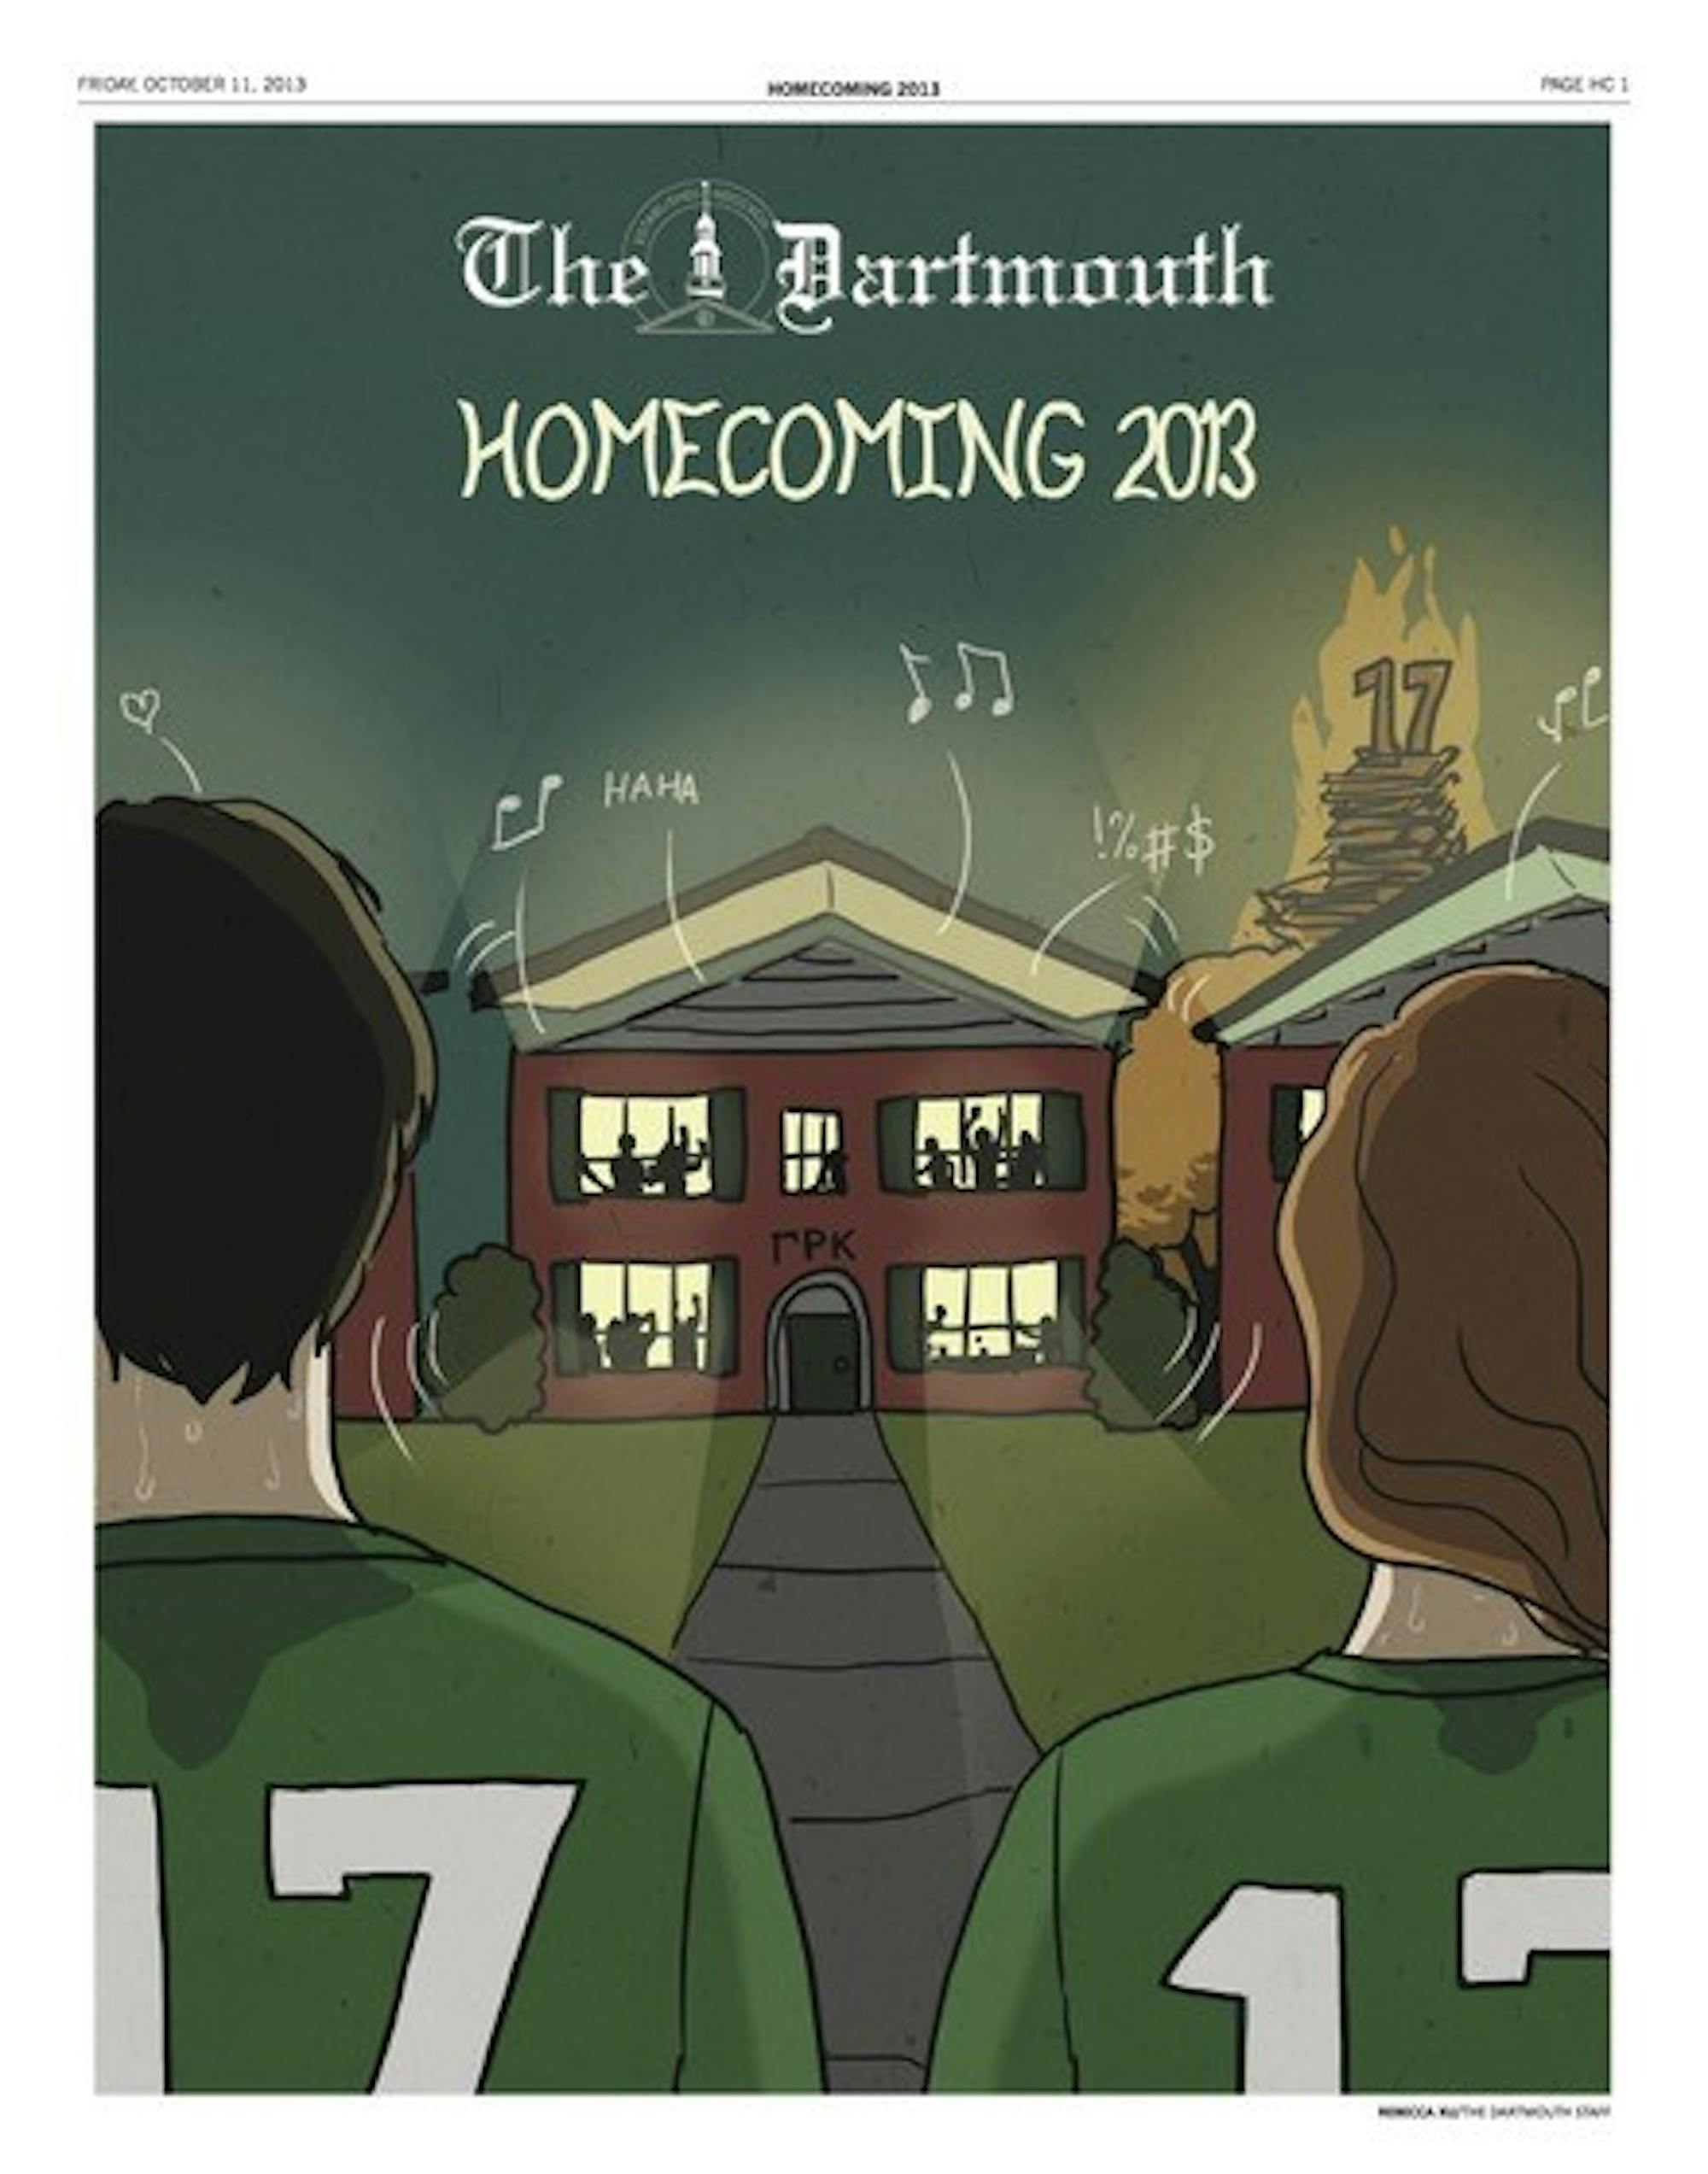 In this year's Homecoming issue, read about the freshman ban, our beloved traditions' similarities to hazing and town preparations for the big weekend.